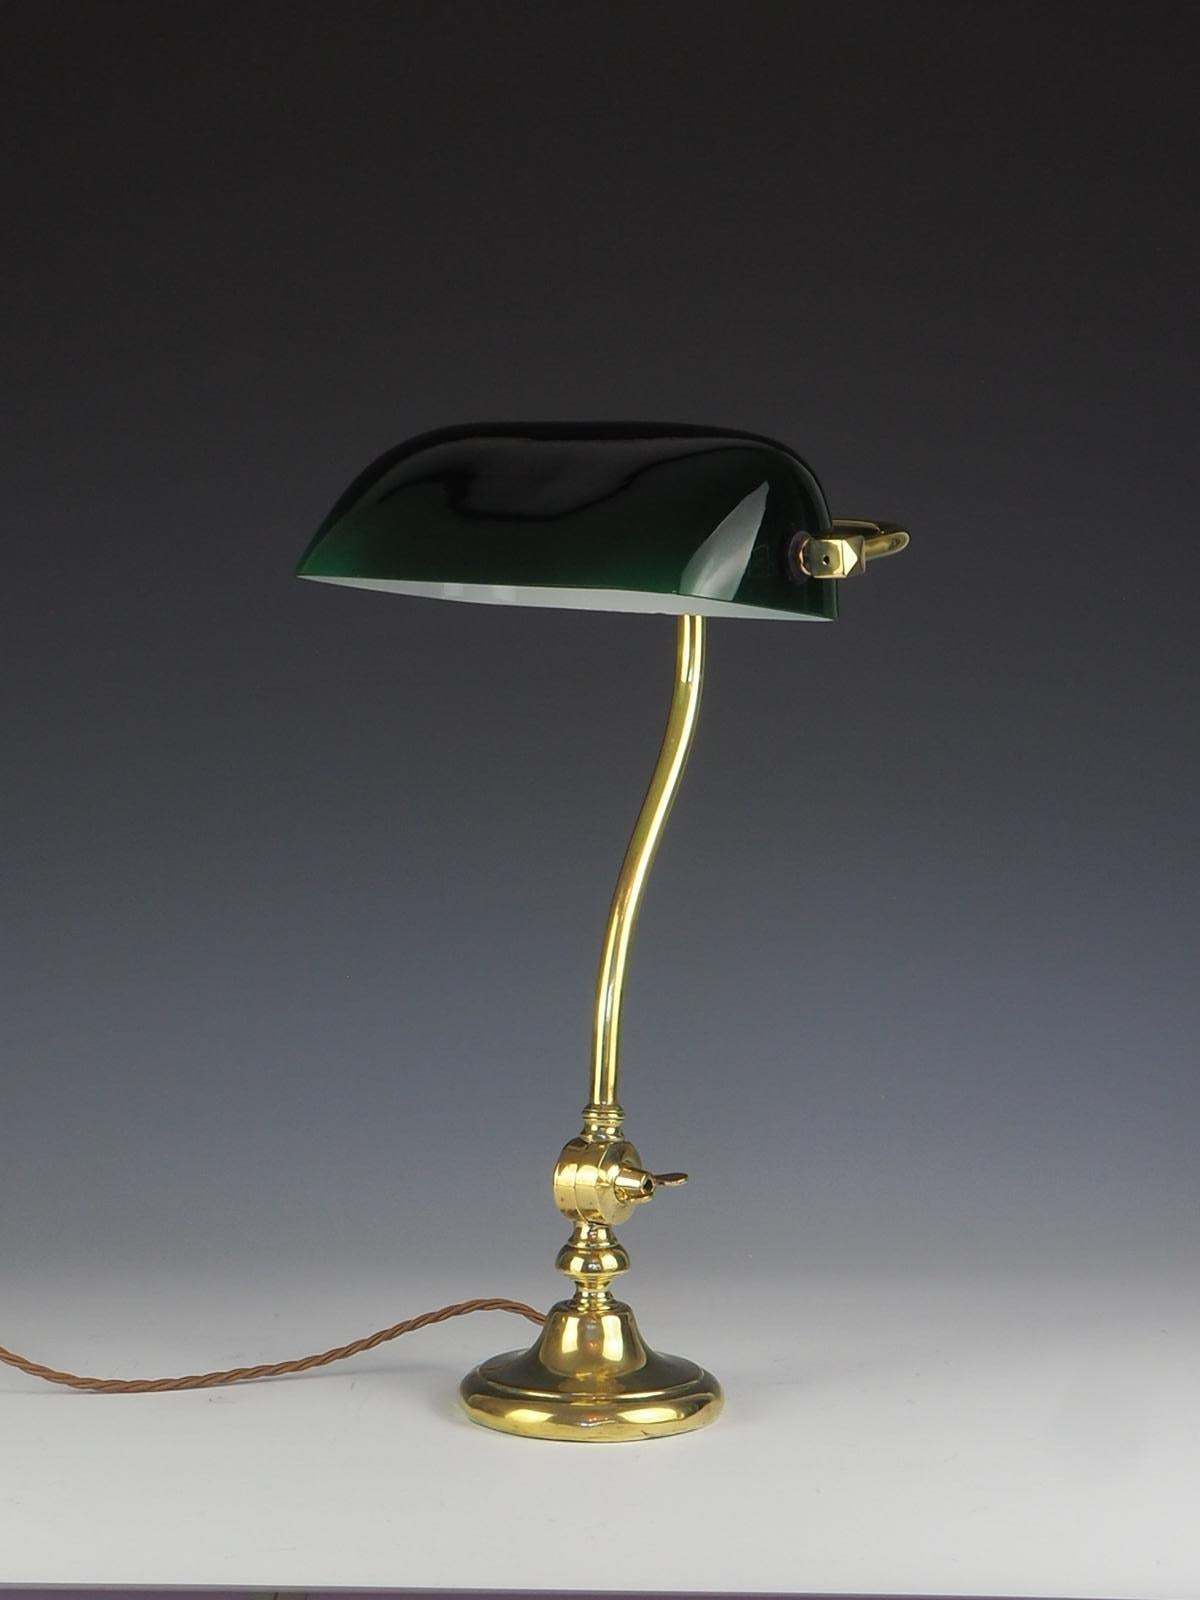 A stunning Greenalite bankers lamp in brass.

The shade is a lovely hue of dark green glass and white inside, has two small chips

The base allows for a very small amount of adjustment (not much, however, due to the weight of the glass) and is